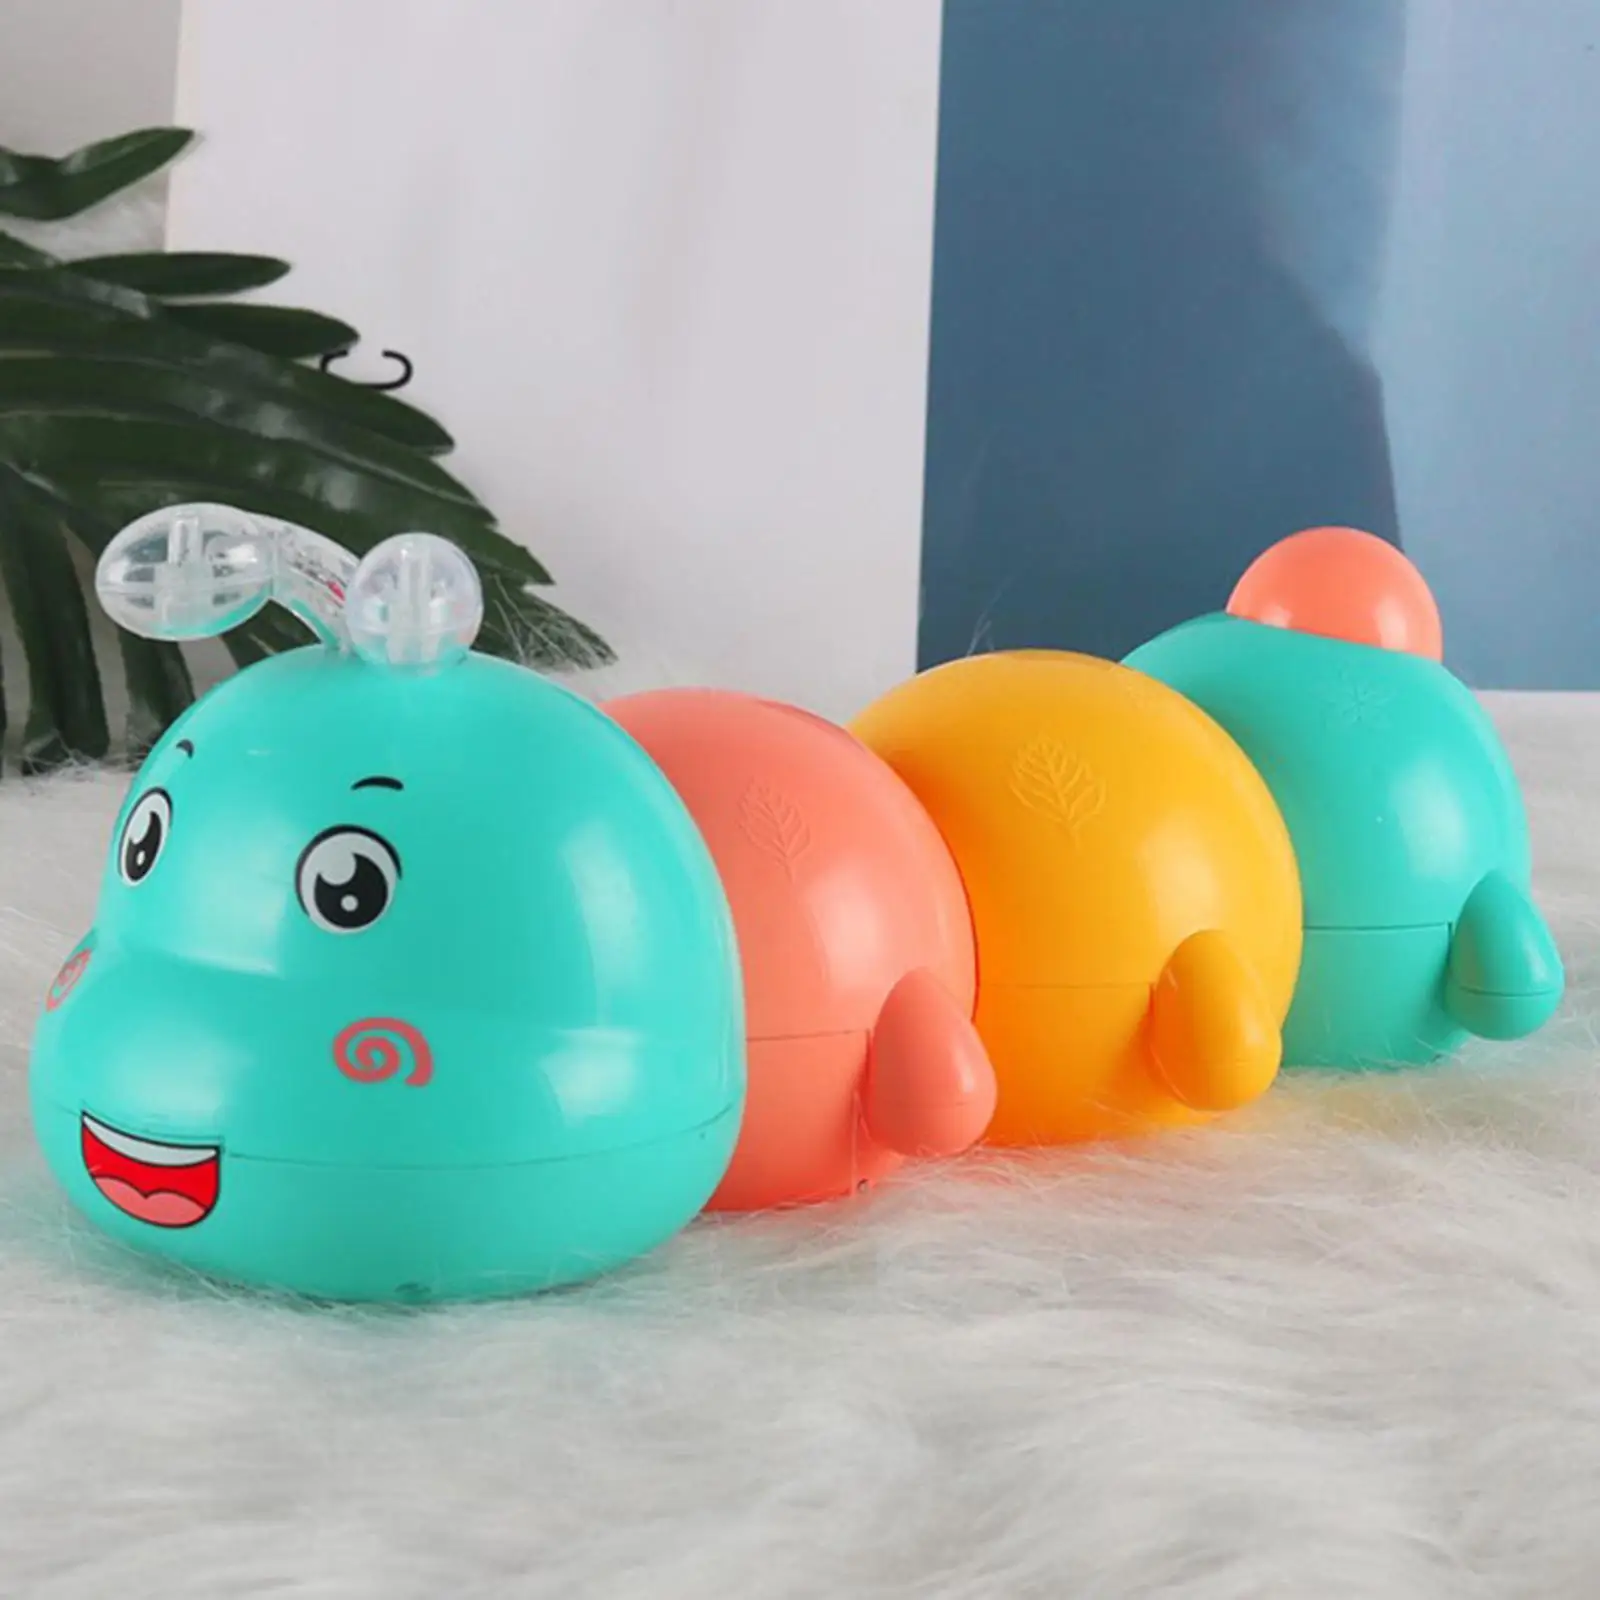 RC Animal Toys Motor Skills Remote Control Caterpillar Toy for Children